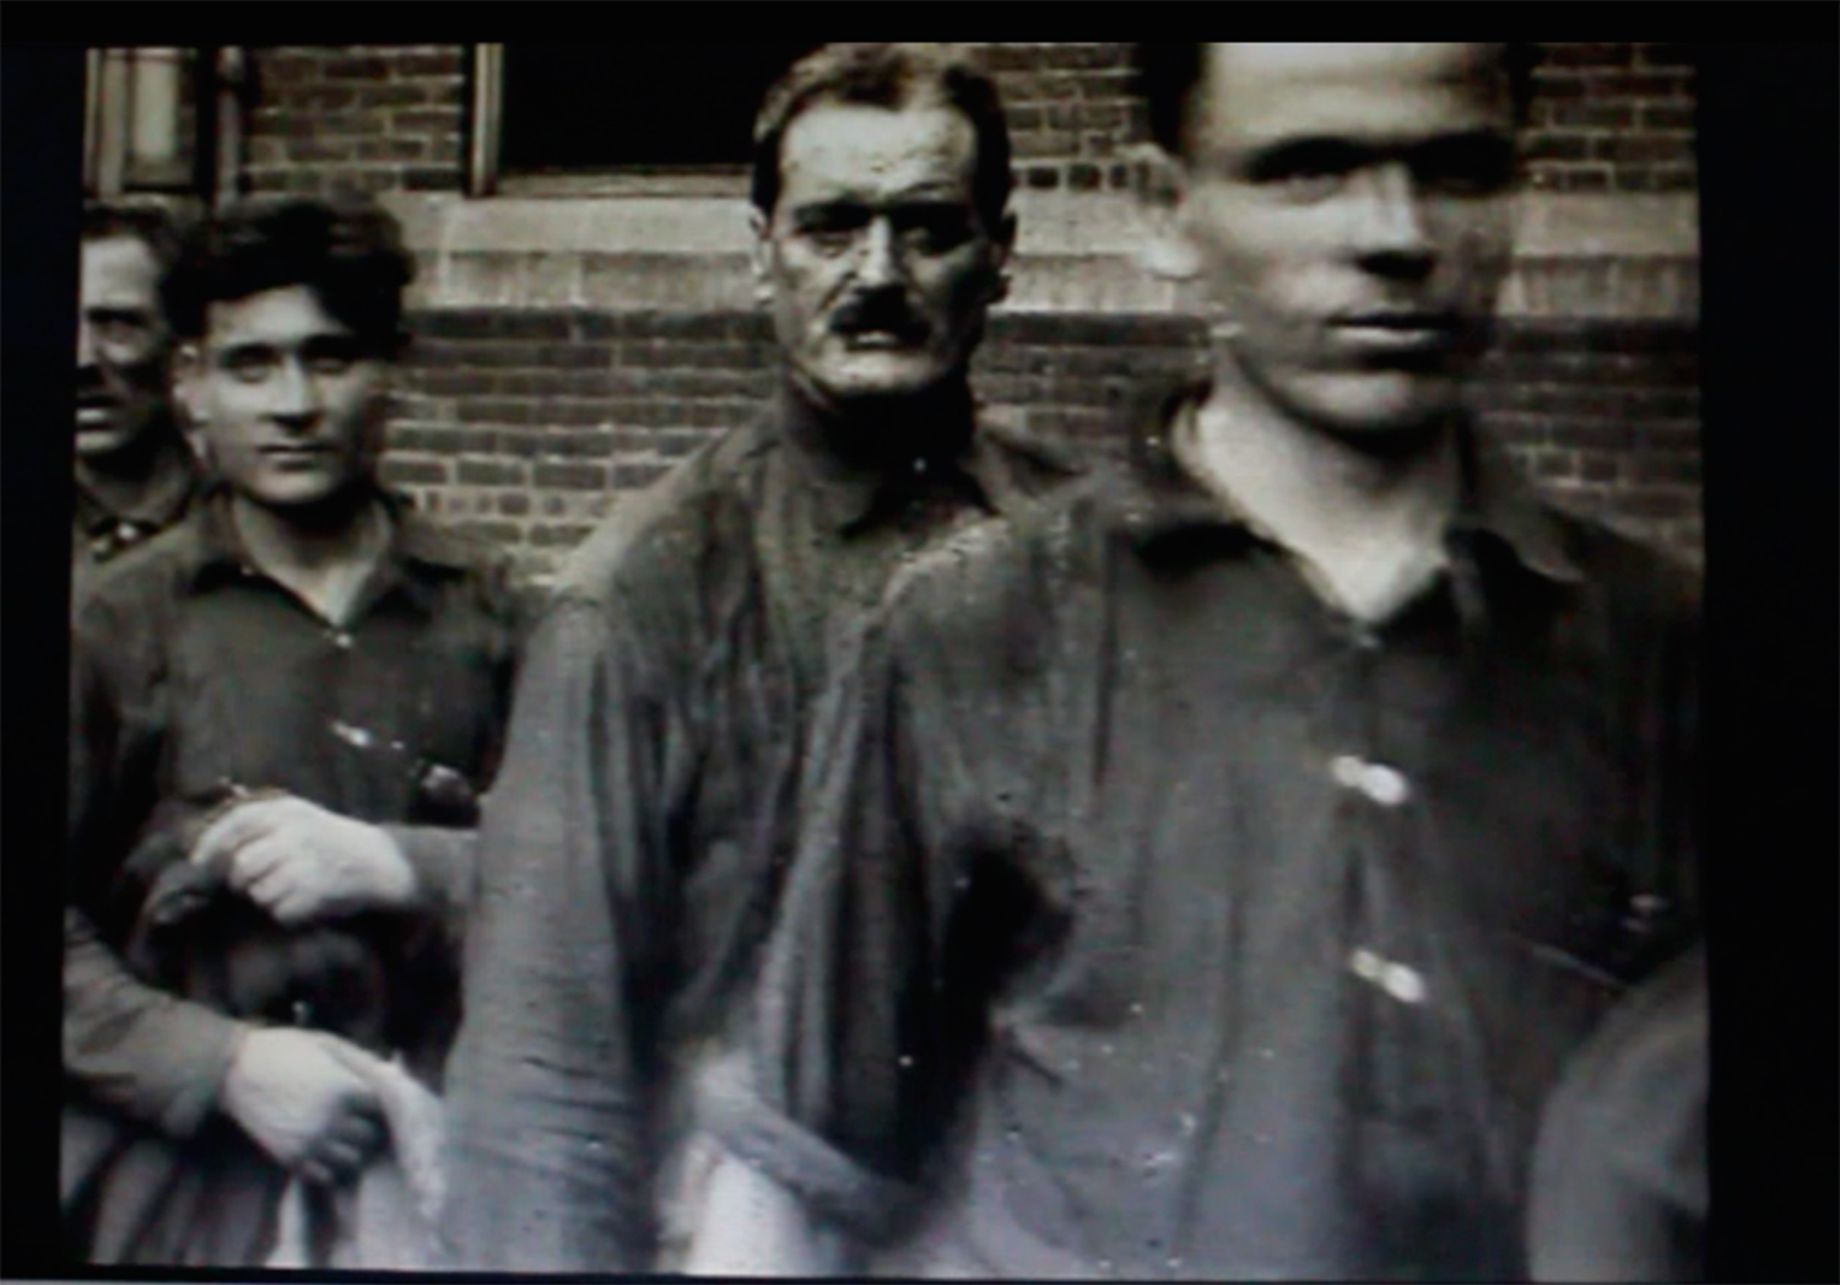 Still from a Ford Motion Picture Studio film showing foreign workers arriving to work in Detroit. Ford Film Collection, 1926